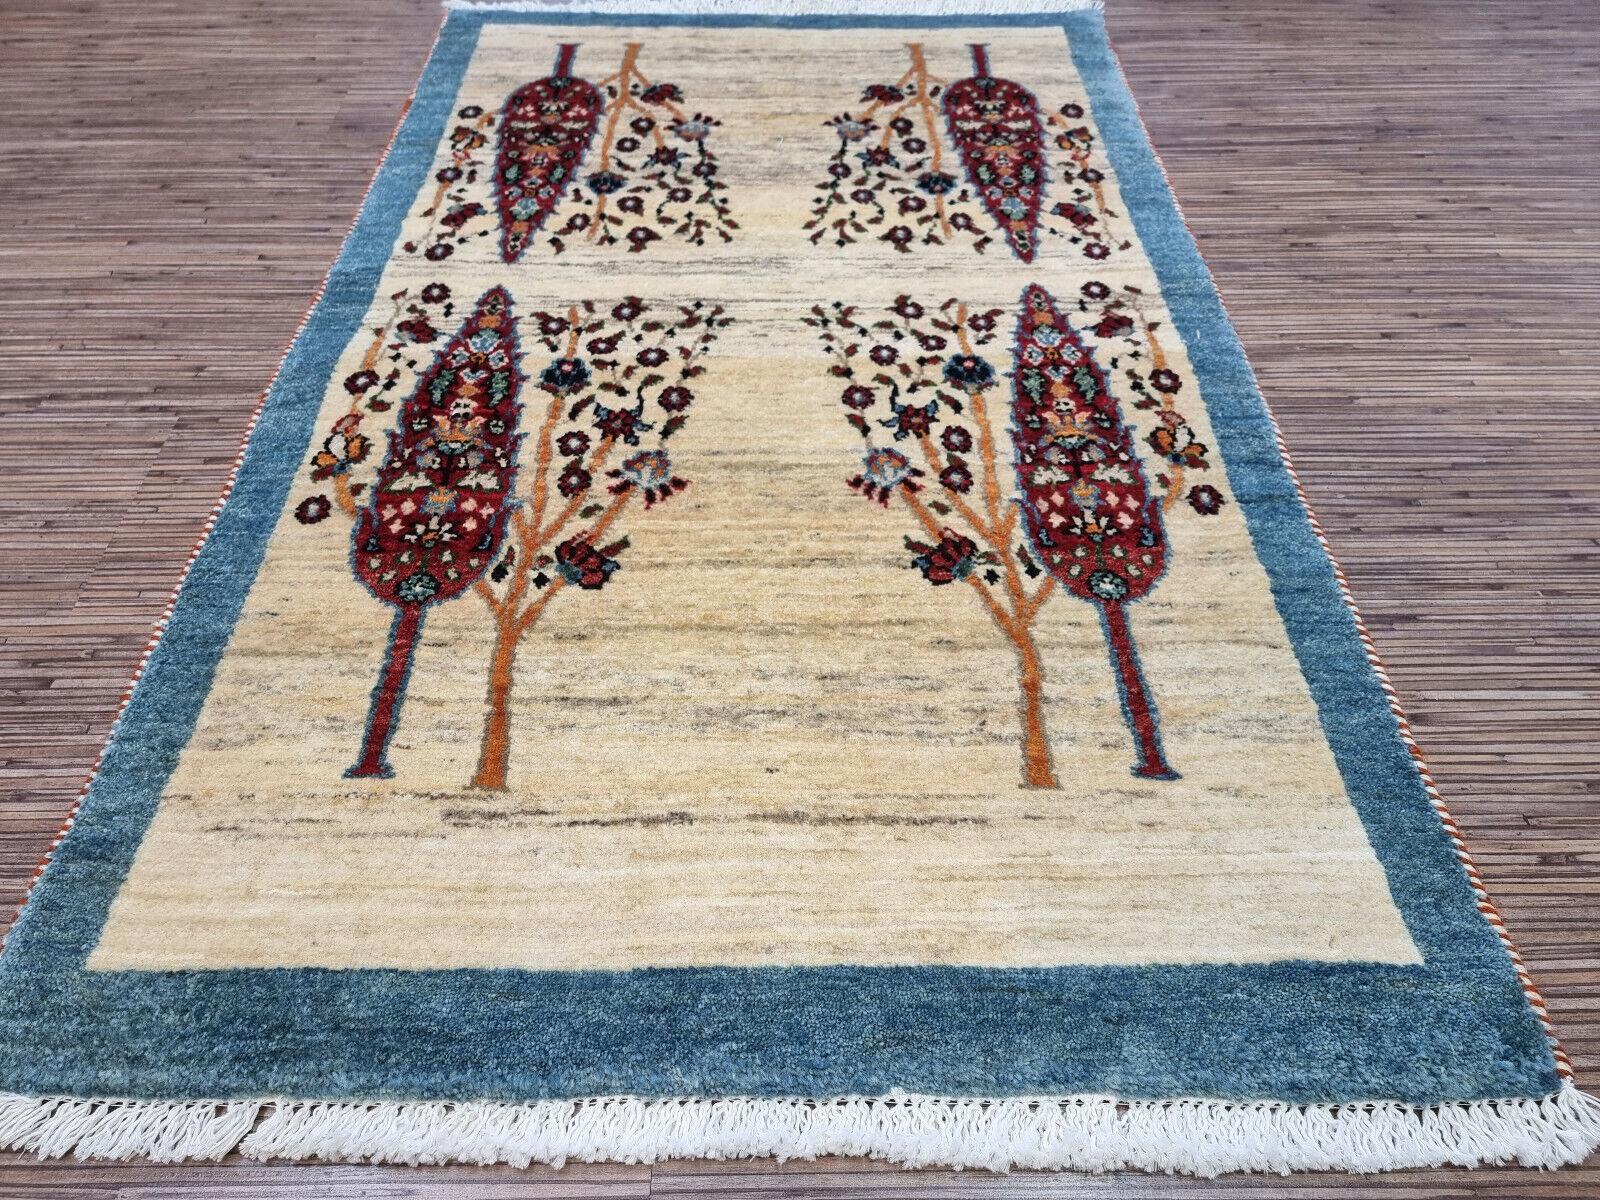 Late 20th Century Handmade Vintage Persian Style Gabbeh Rug 2.3' x 3.8', 1980s - 1D118 For Sale